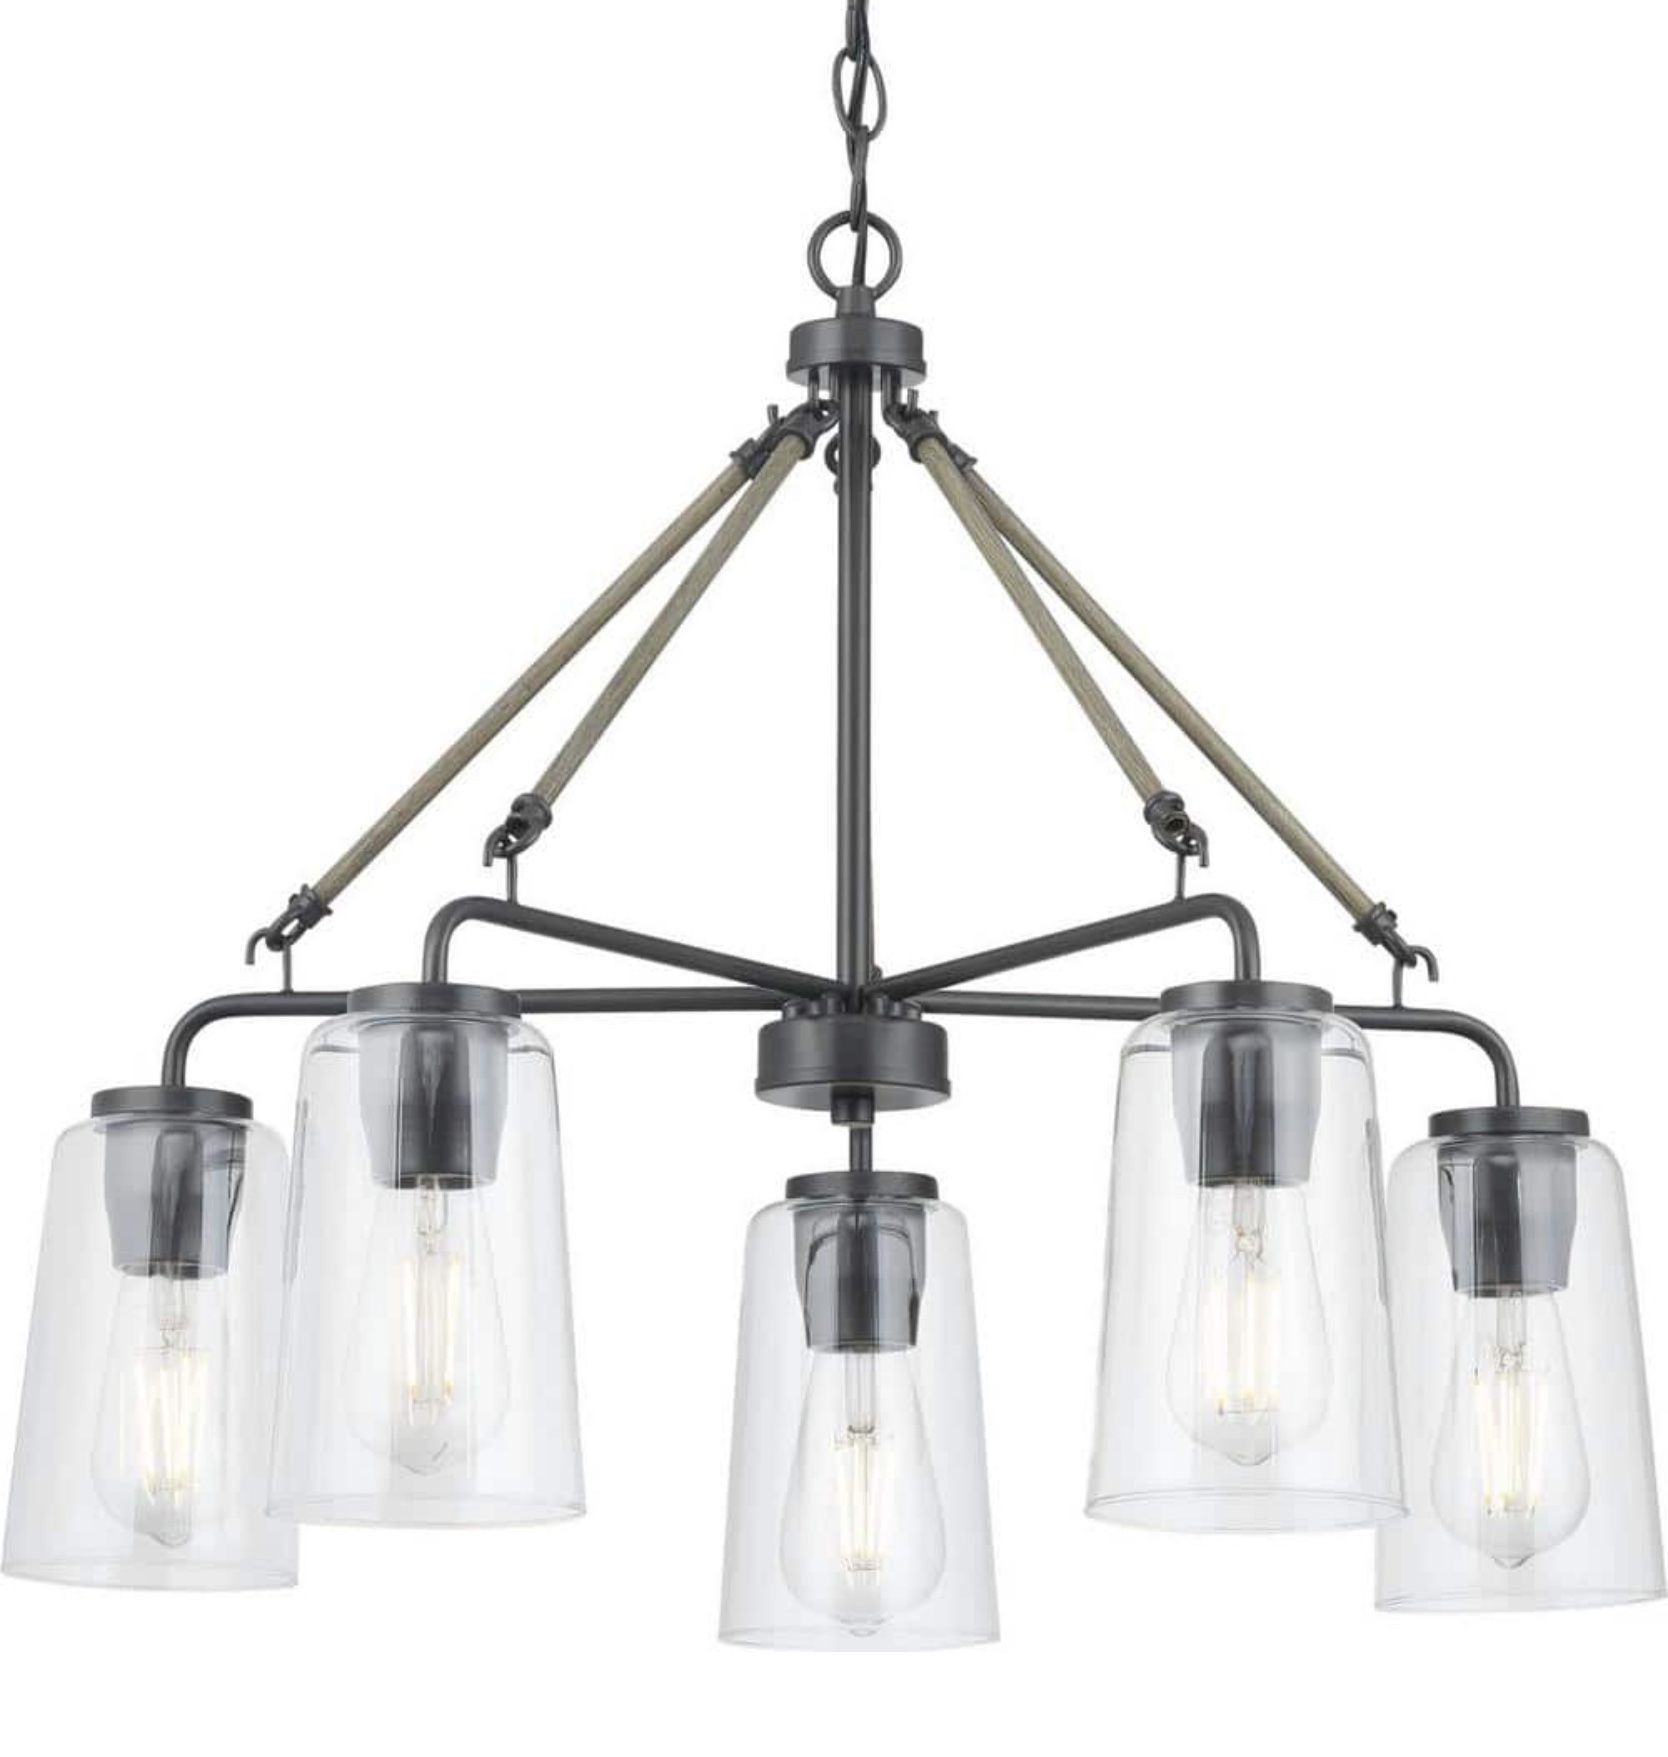 Progress Lighting Cashiers 24 in. 5-Light Graphite Chandelier with Clear Glass Shades $95  Luke’s liquidations warehouse Address:  2434 north Forsyth 